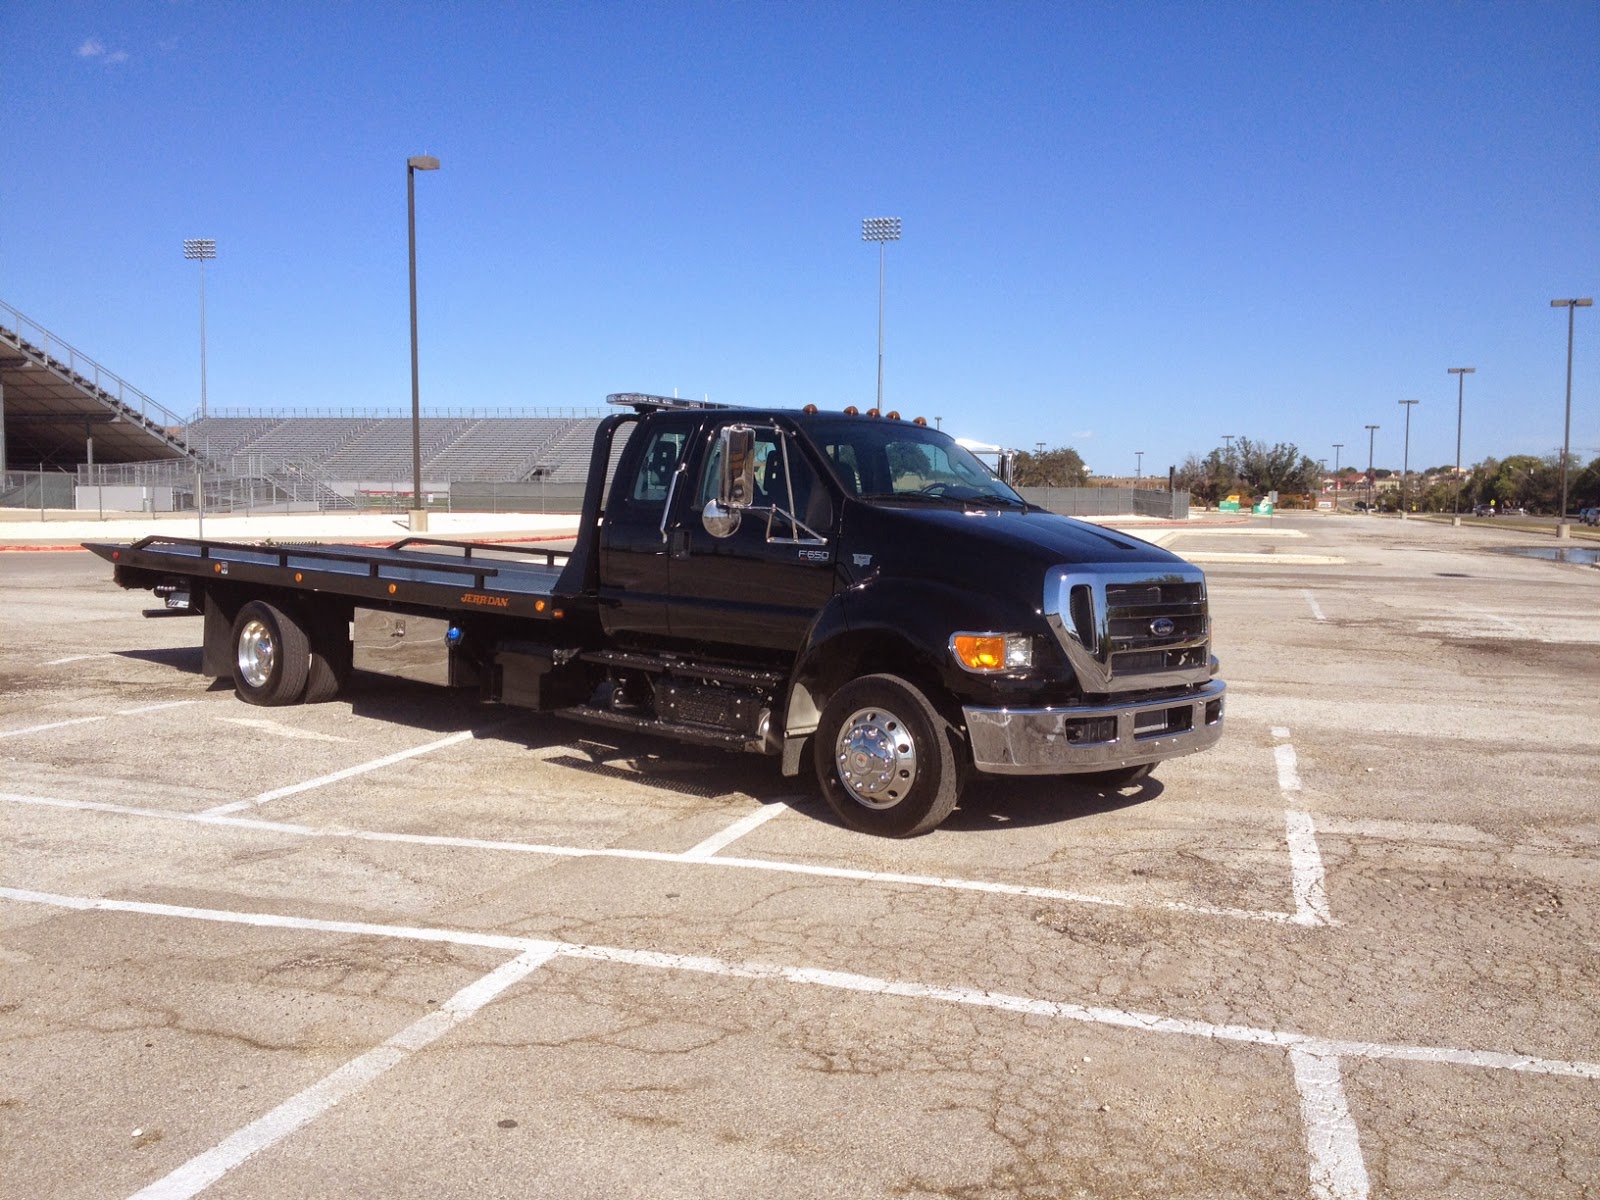 Boom Truck Sales & Rental: Rush Towing Systems Inventory List